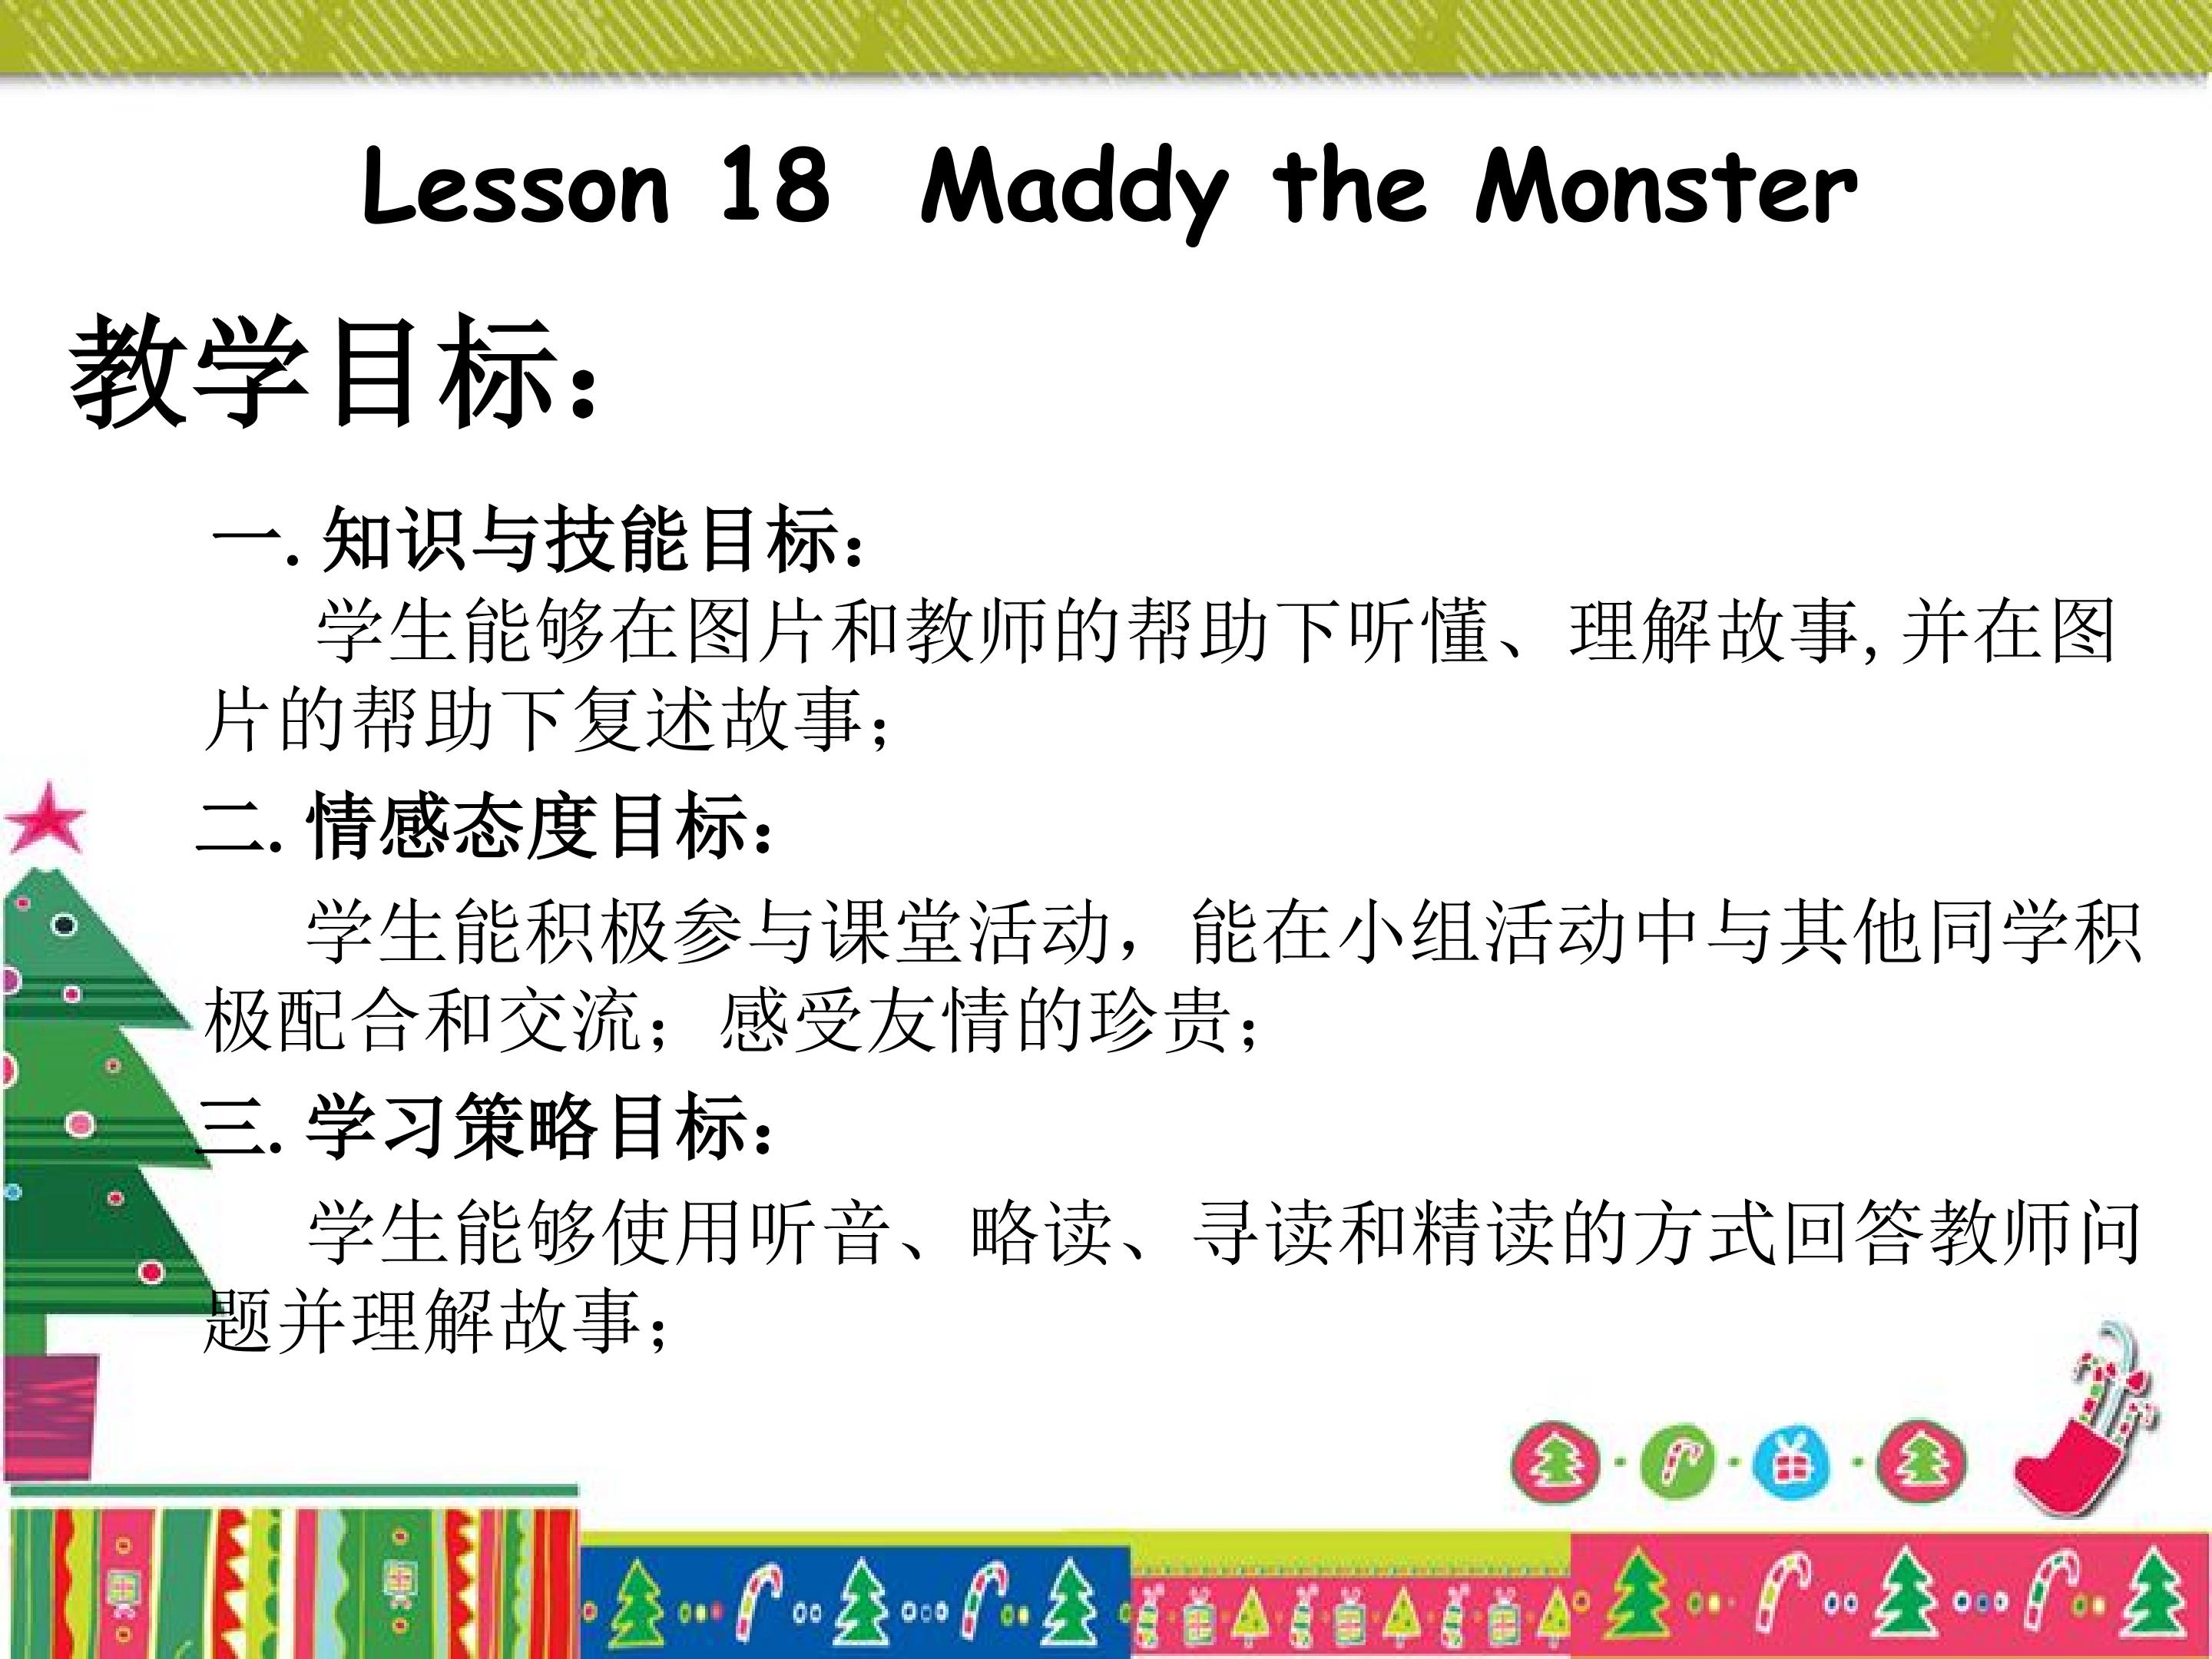 Maddy the monster